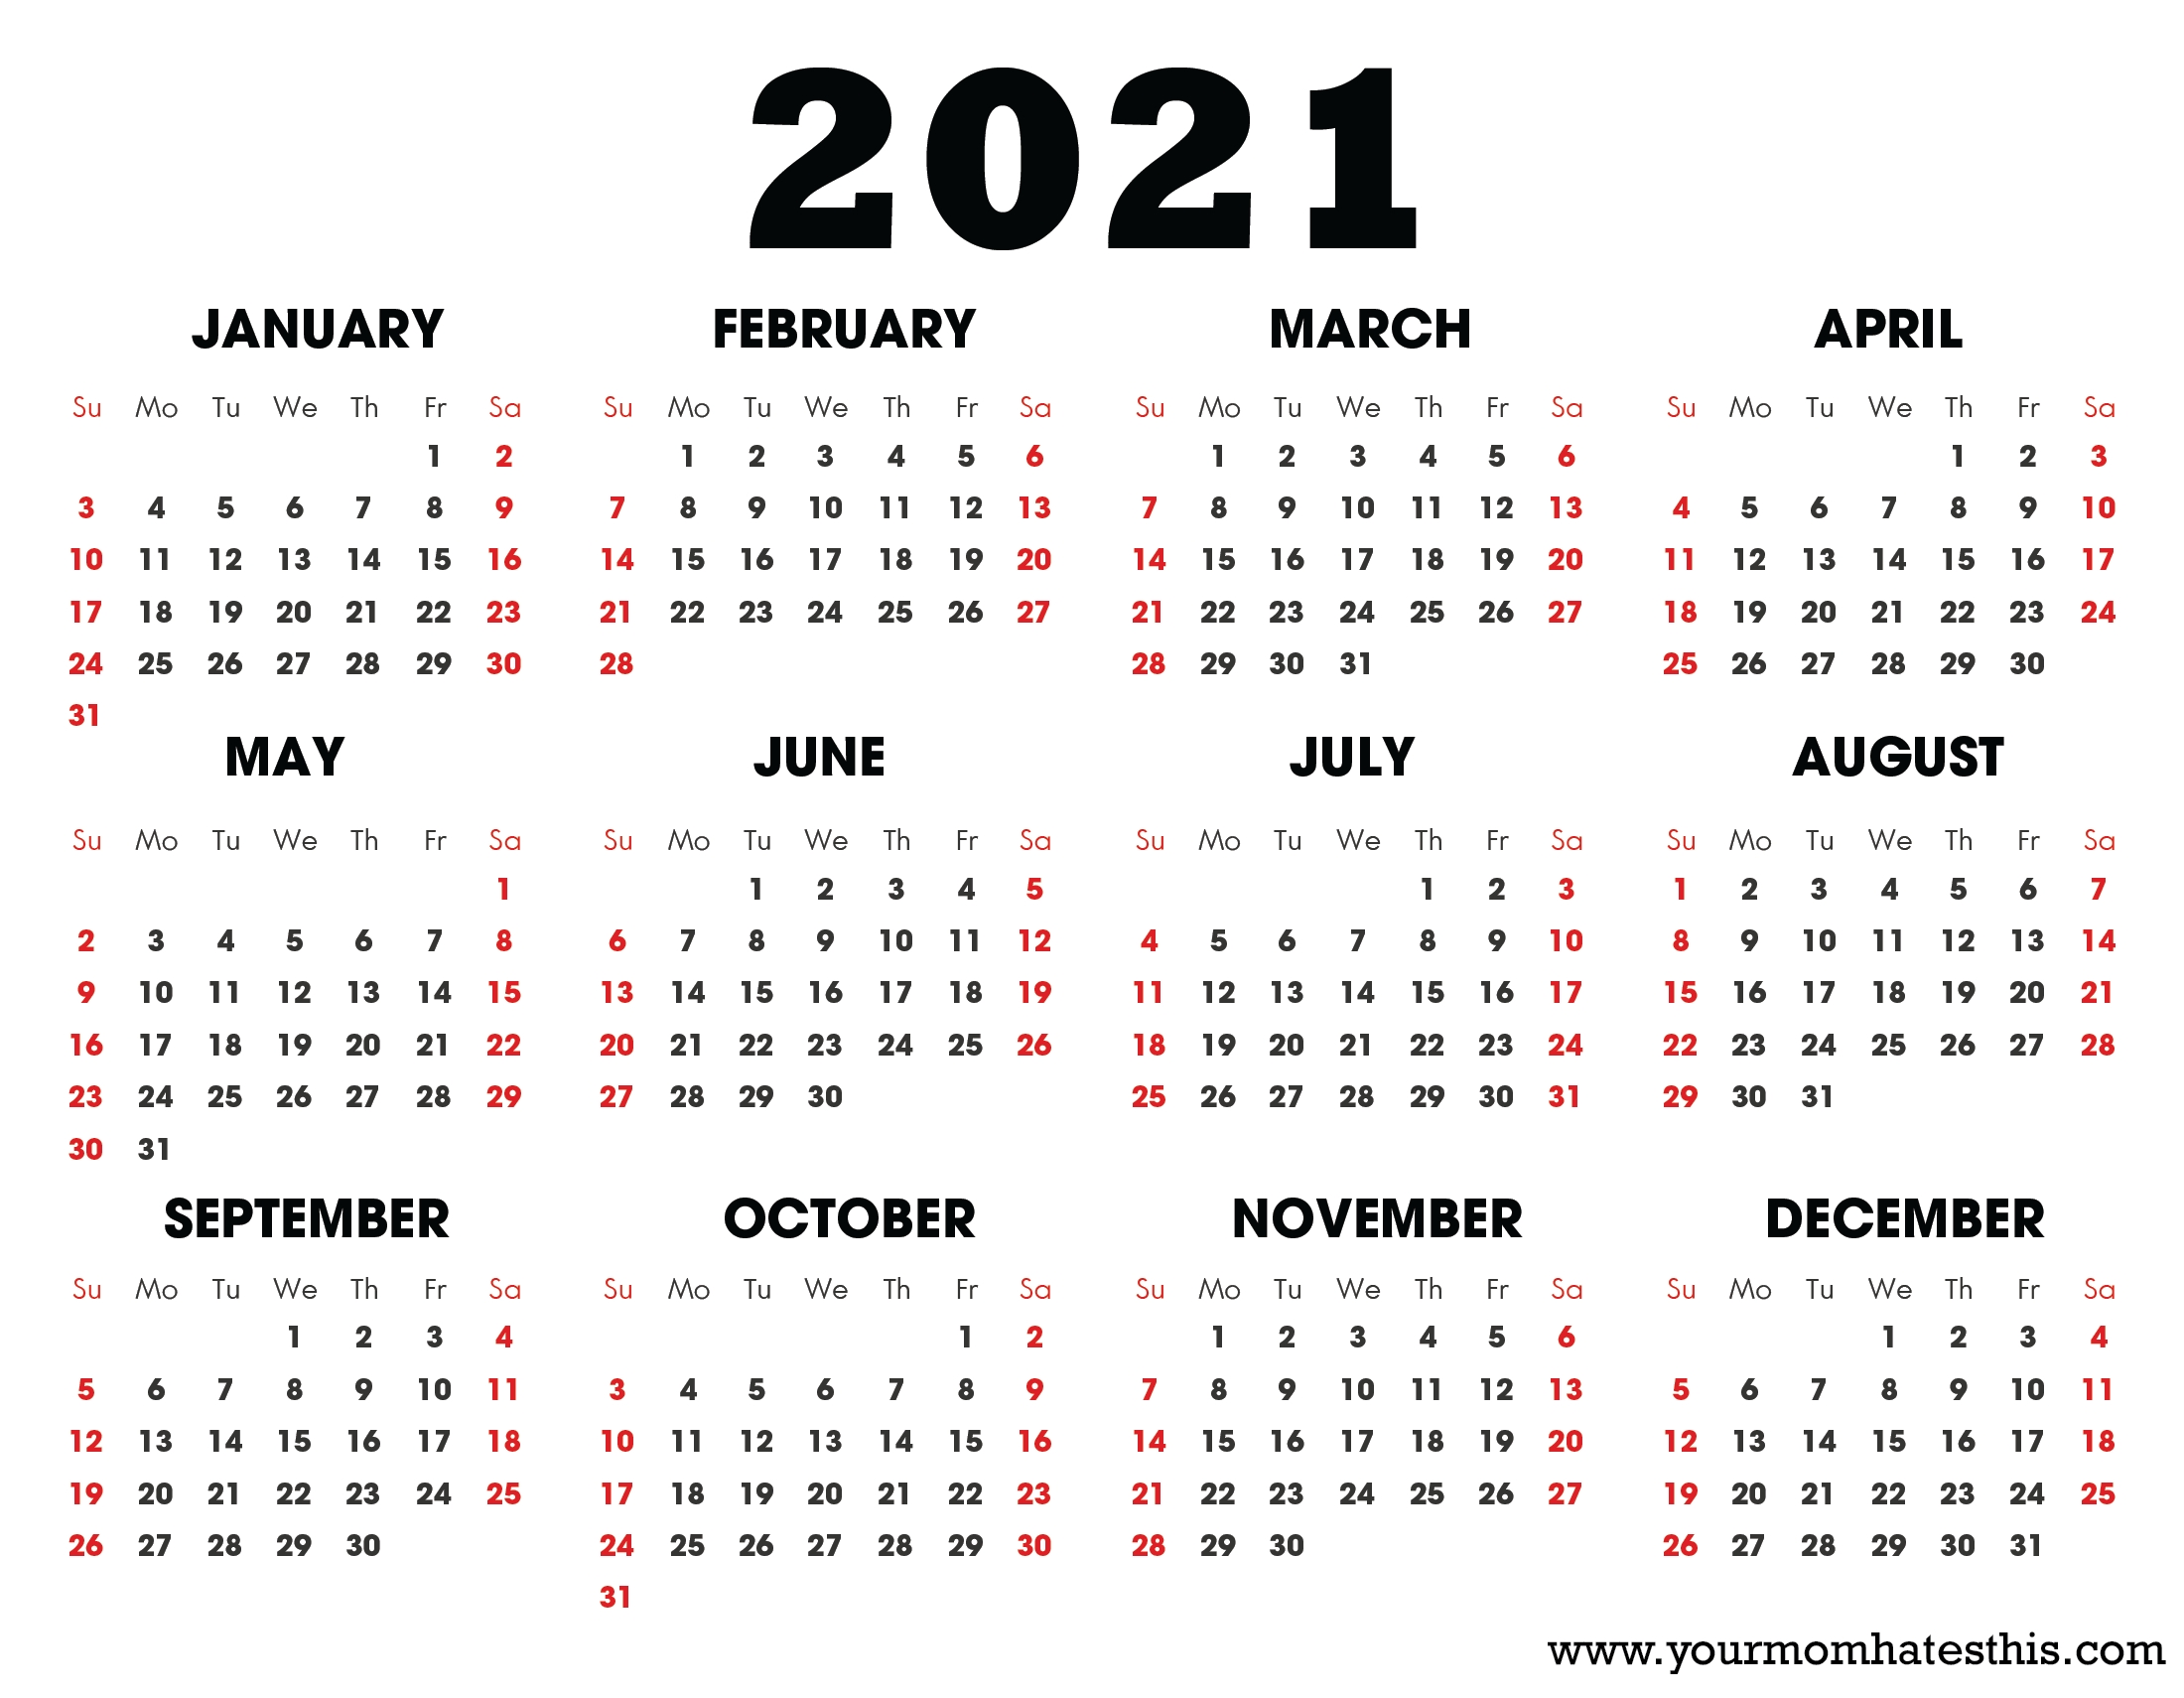 2021 Calendars For Business - 4K Images